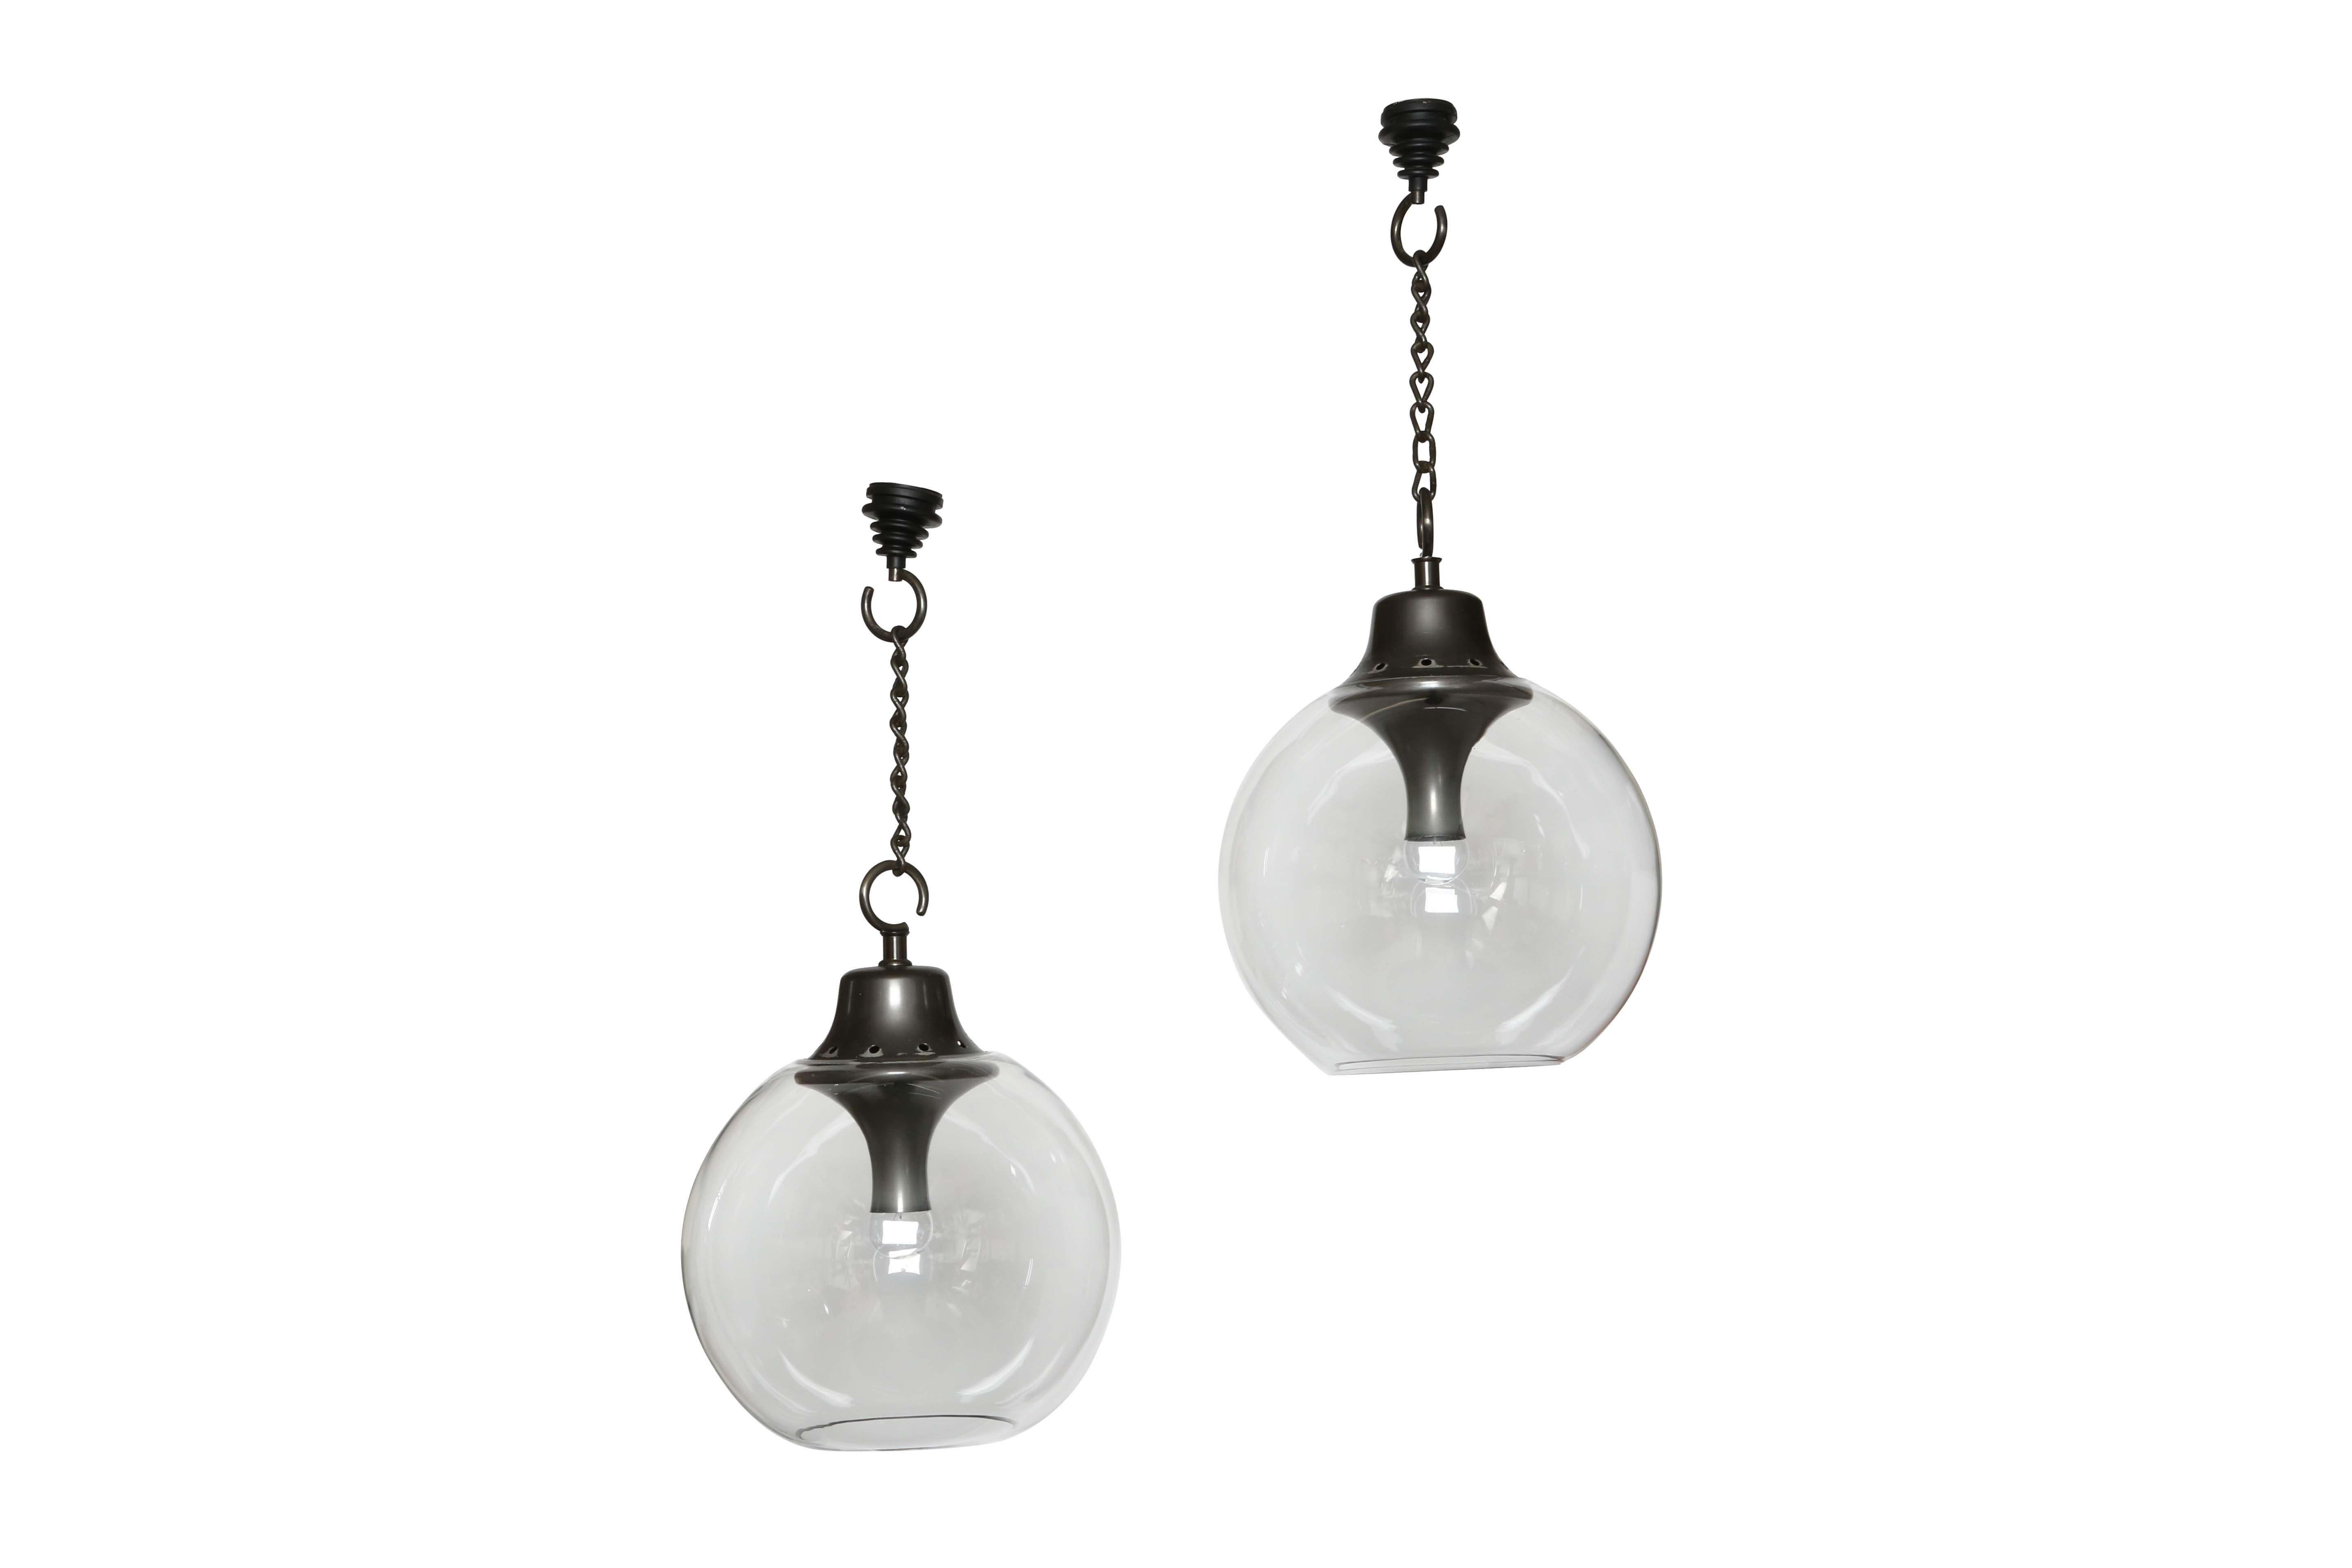 Luigi Caccia Dominioni for Azucena ceiling suspension lights.
Model LS10 Boccia. Designed and manufactured in Italy in 1960s.
Murano glass, patinated aluminum glass holder and steel chain.
Complimentary US rewiring upon request.
Priced and sold